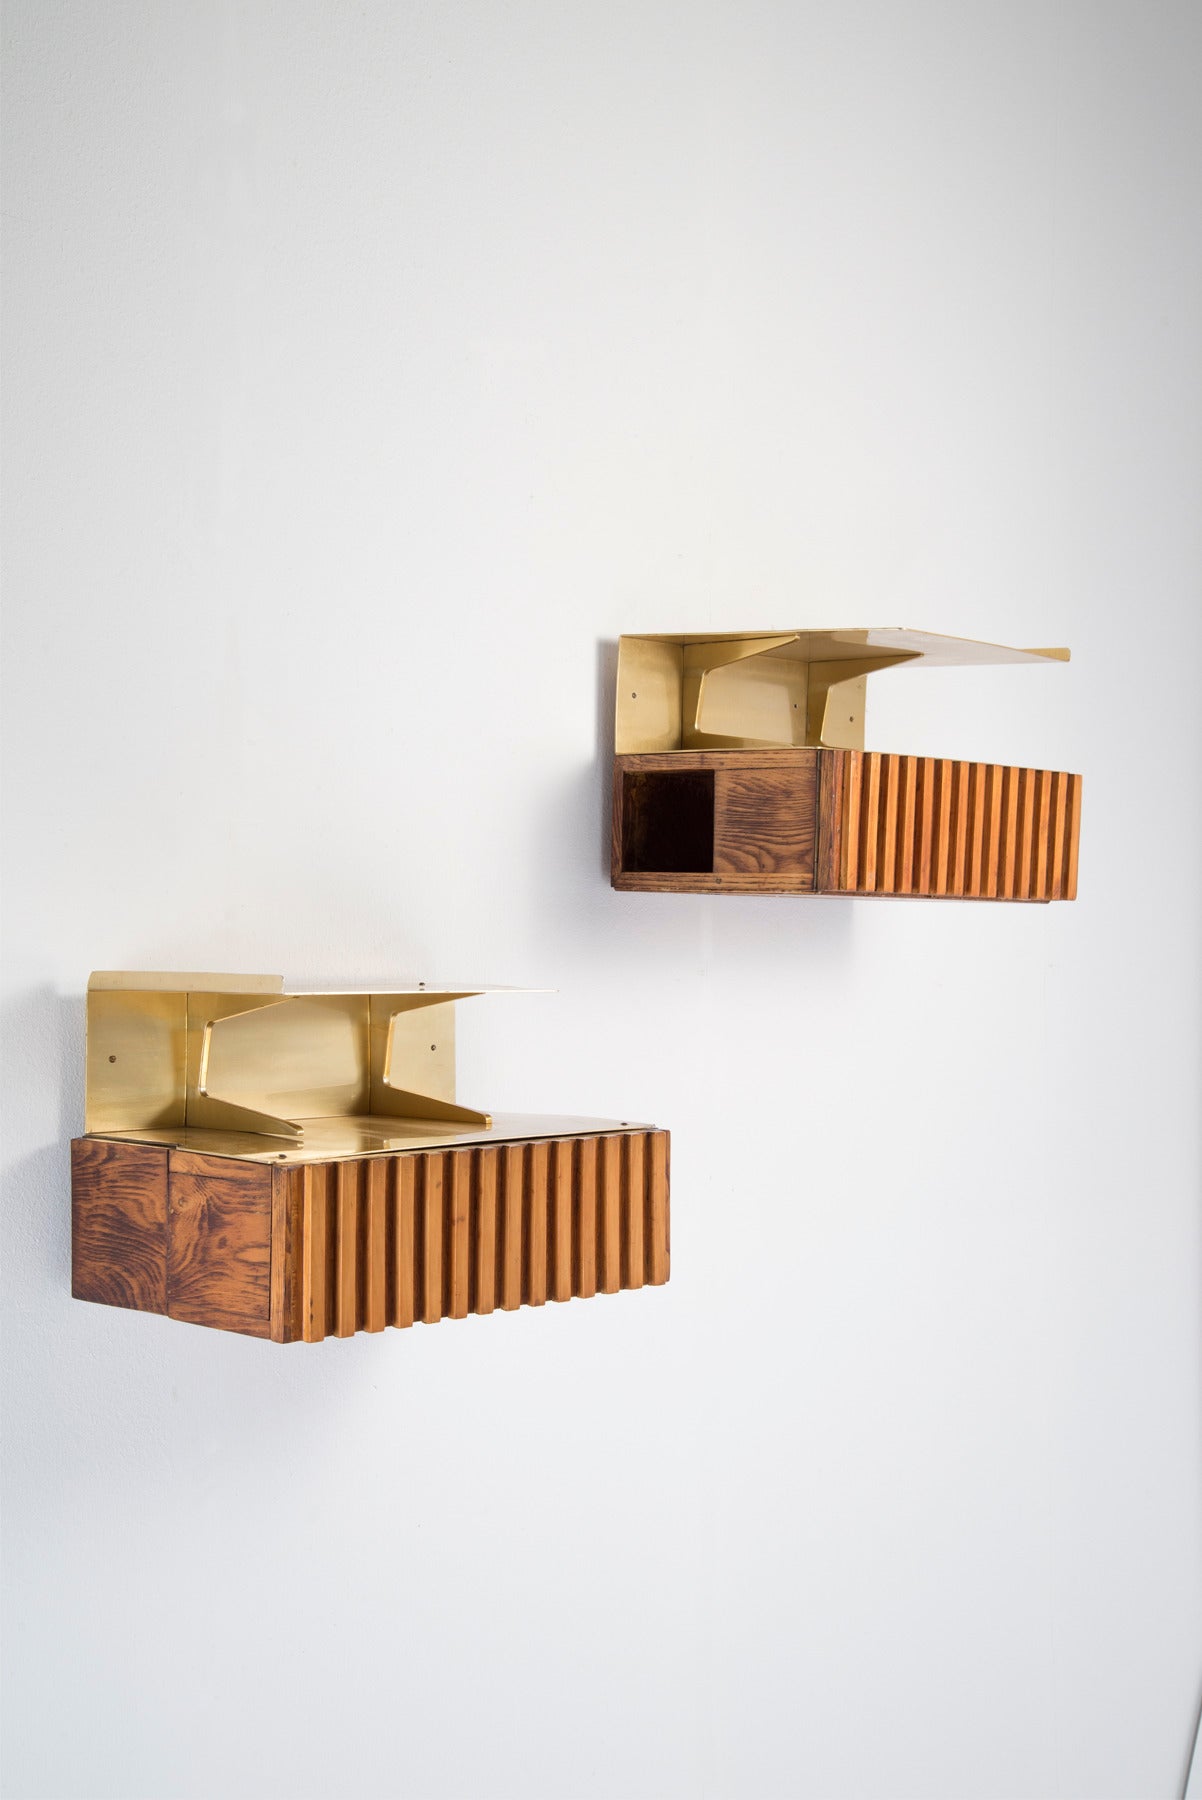 Pair of wall mounted night stands designed by architect Nestorio Sacchi in 1949. Unique pieces made for a private commission. Anodized aluminum top, wooden structure with an opening facing the bed side and one single drawer.